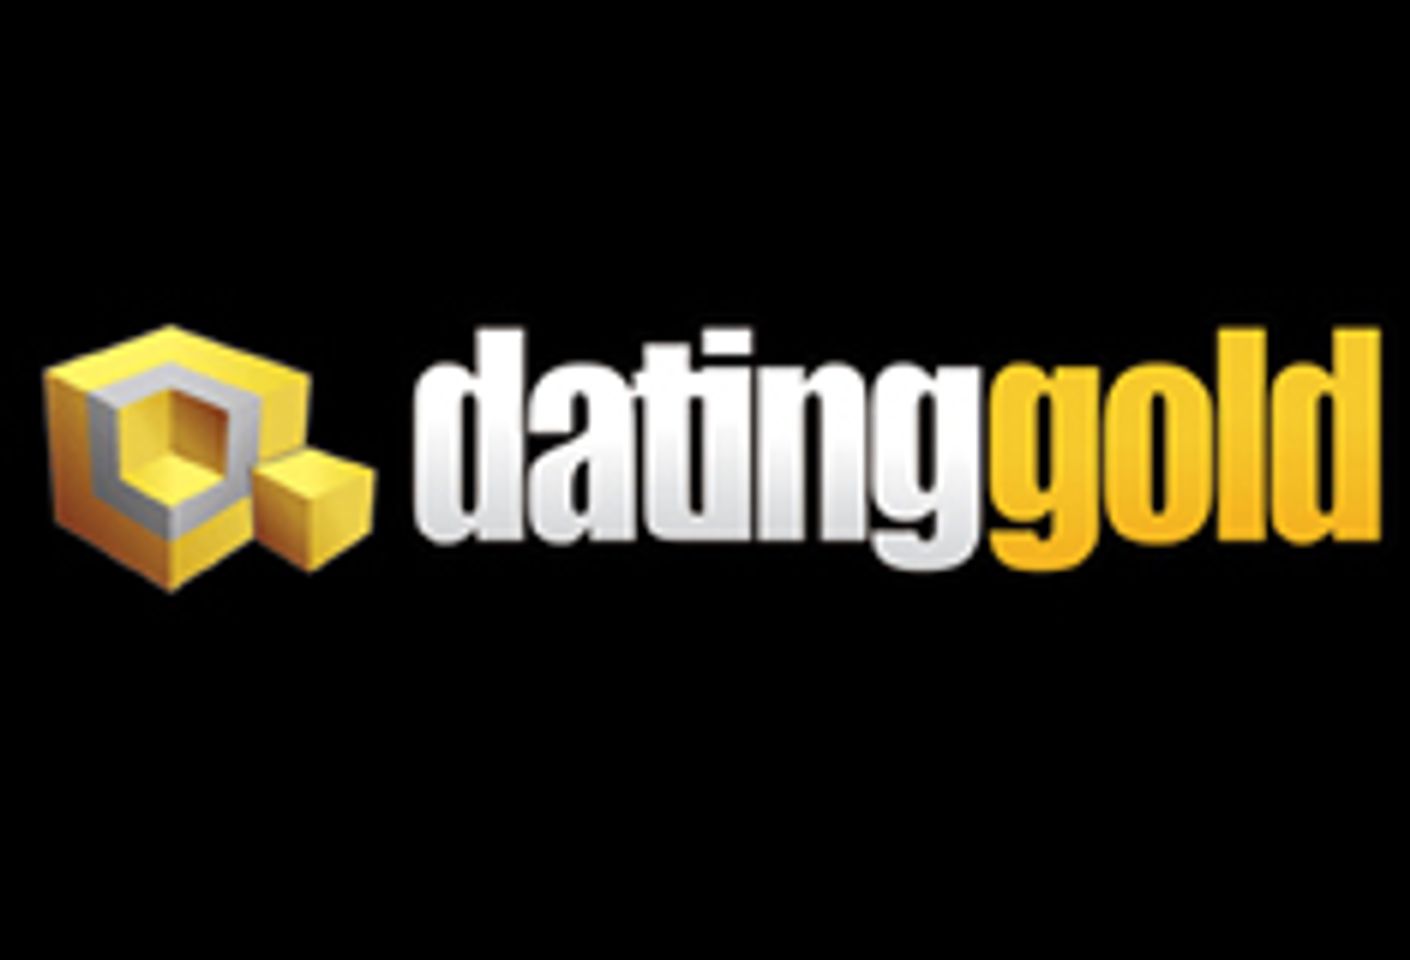 Exclusive Offers Pay Off Big-Time for DatingGold